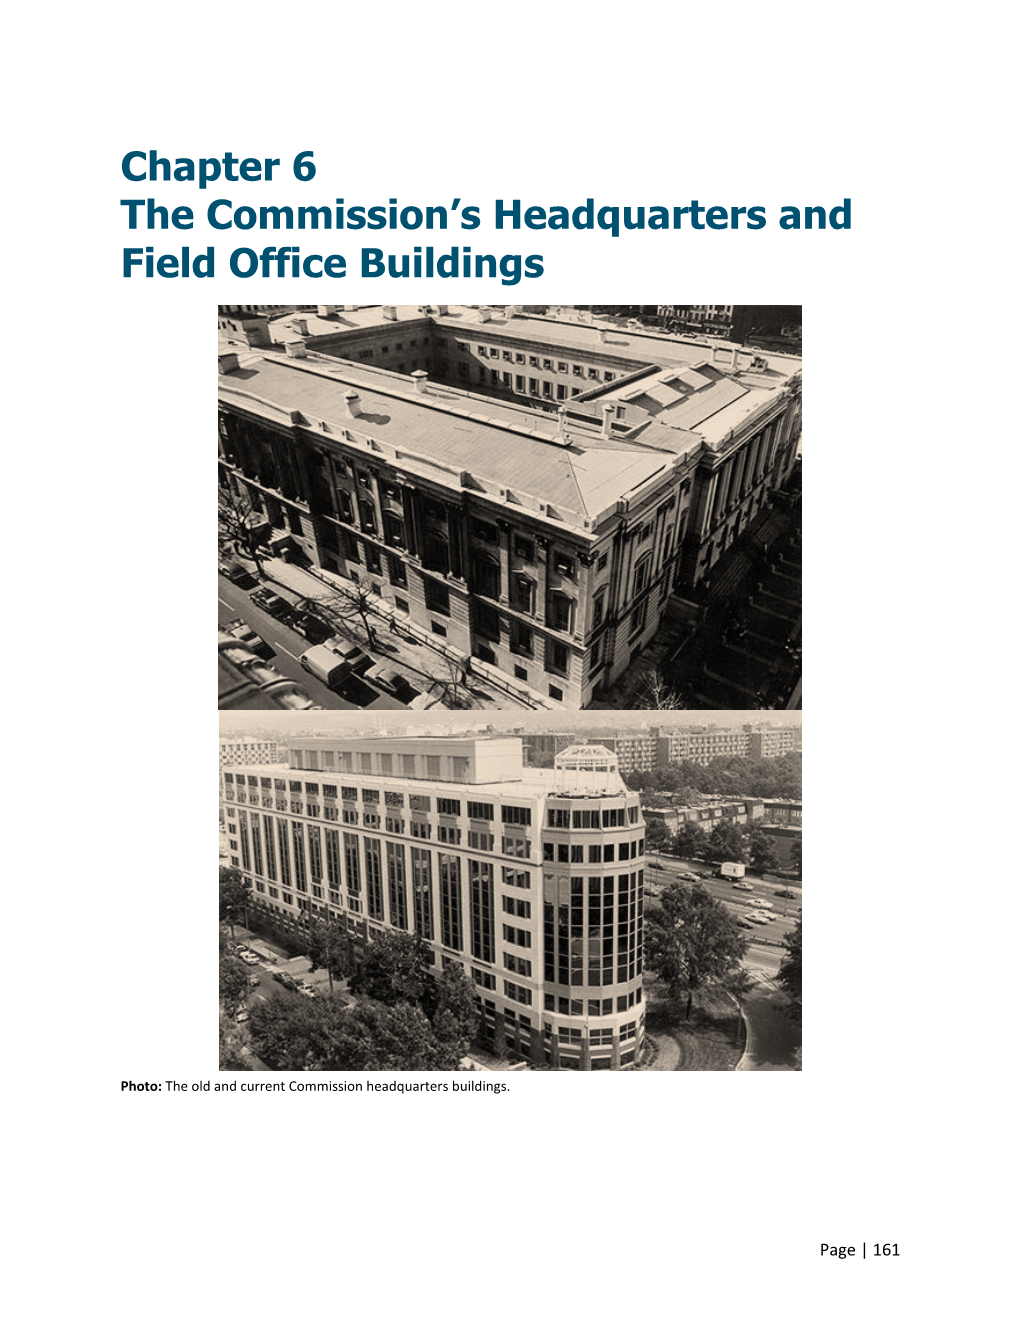 Chapter 6 the Commission’S Headquarters and Field Office Buildings